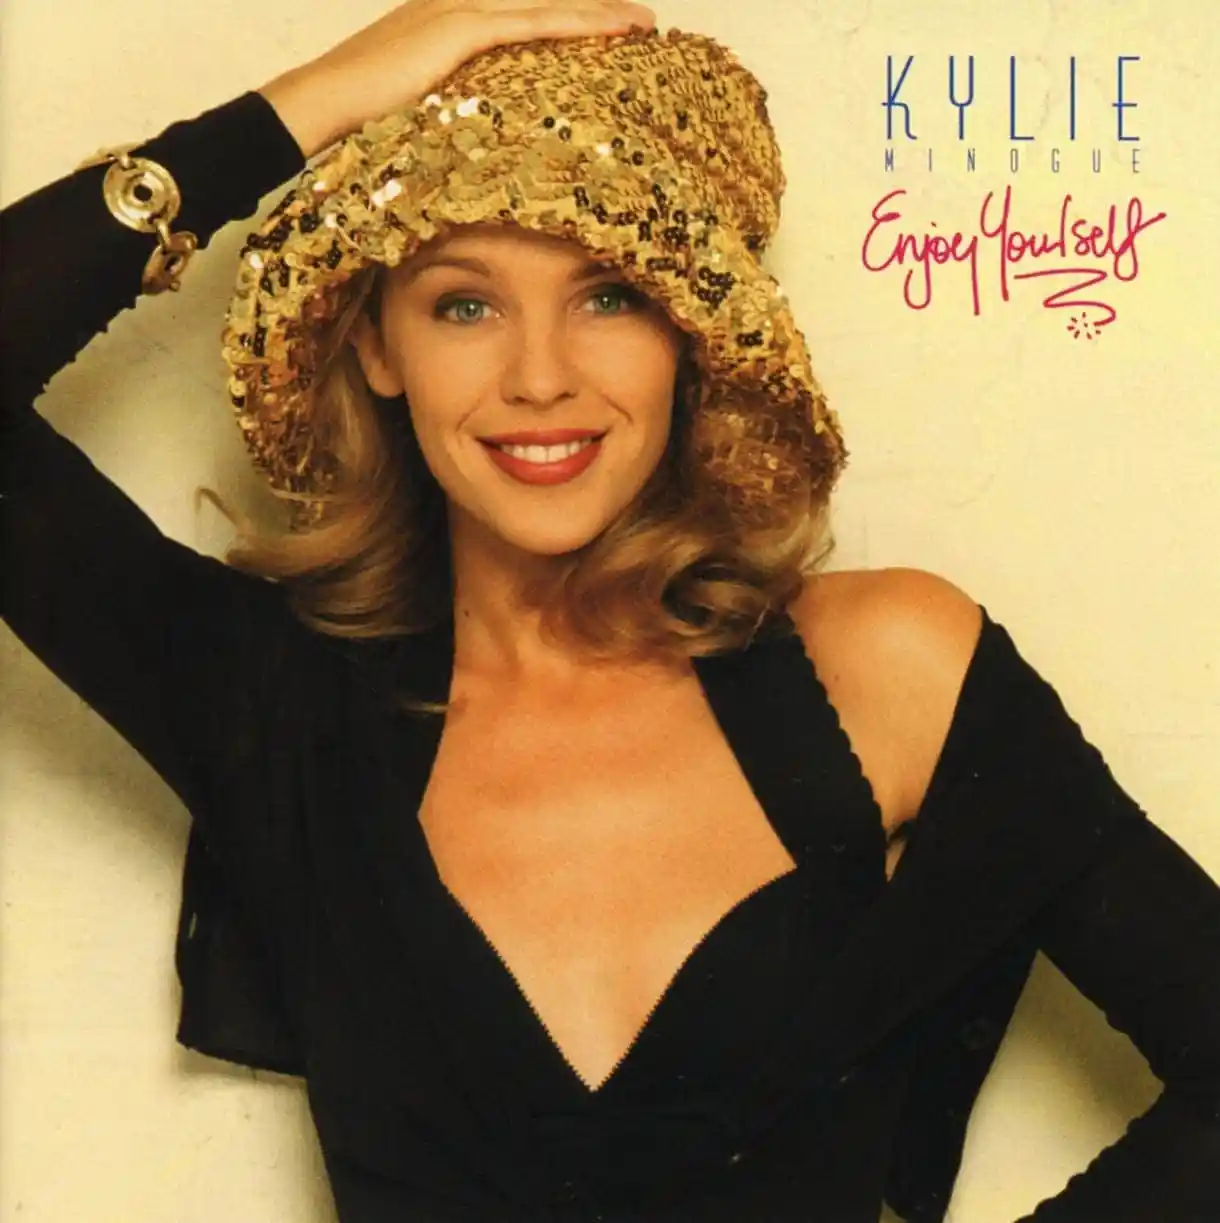 Enjoy Yourself by Kylie Minogue. 